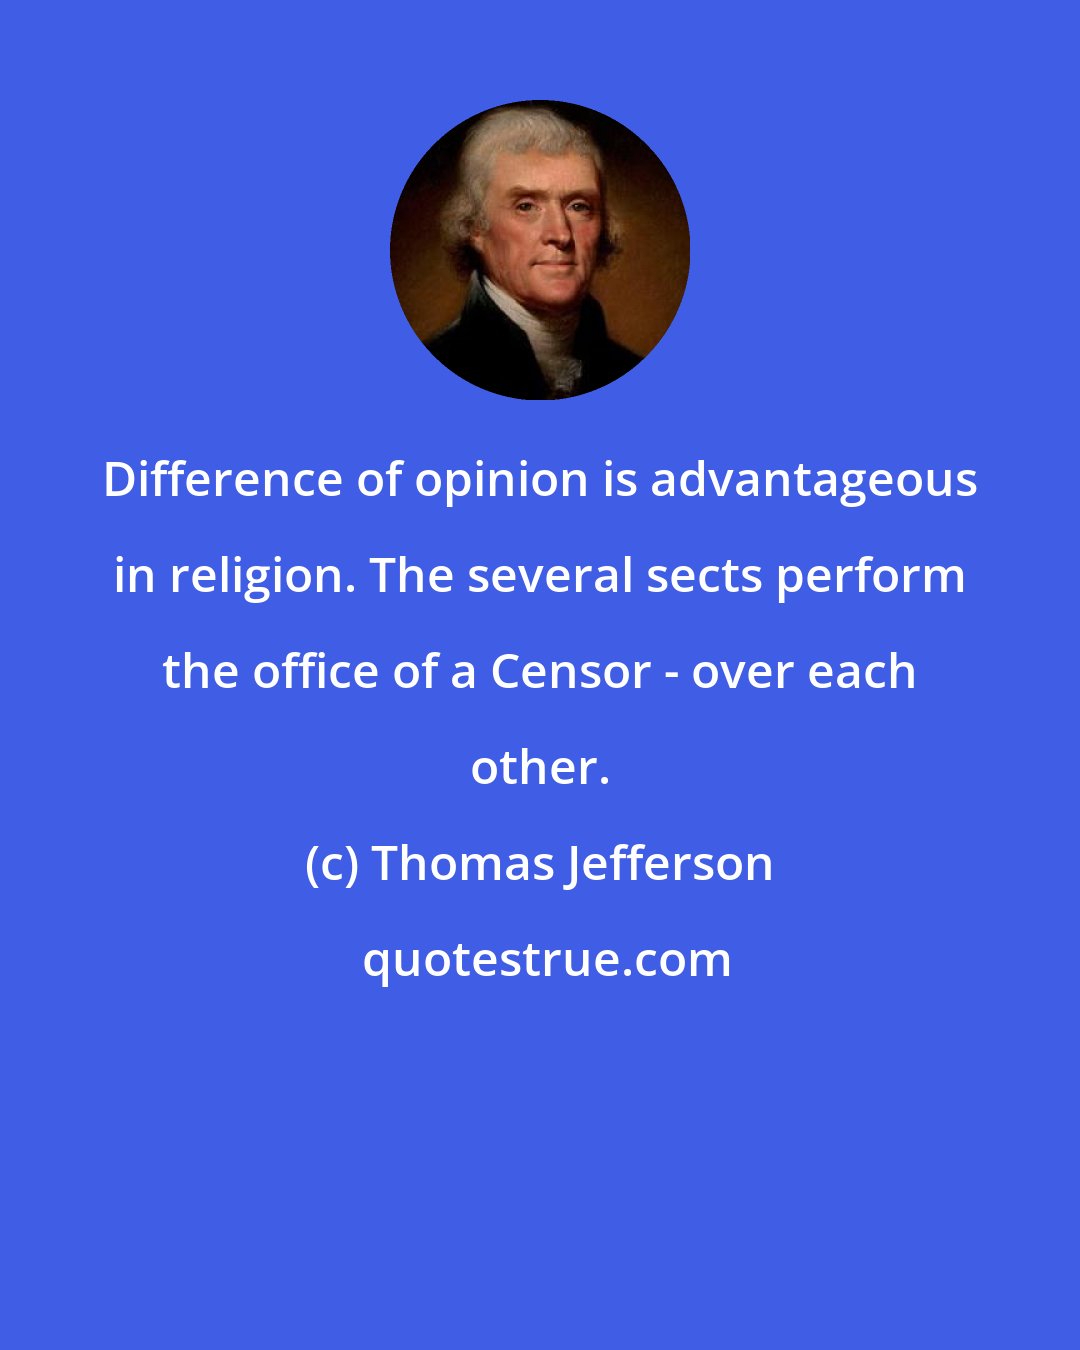 Thomas Jefferson: Difference of opinion is advantageous in religion. The several sects perform the office of a Censor - over each other.